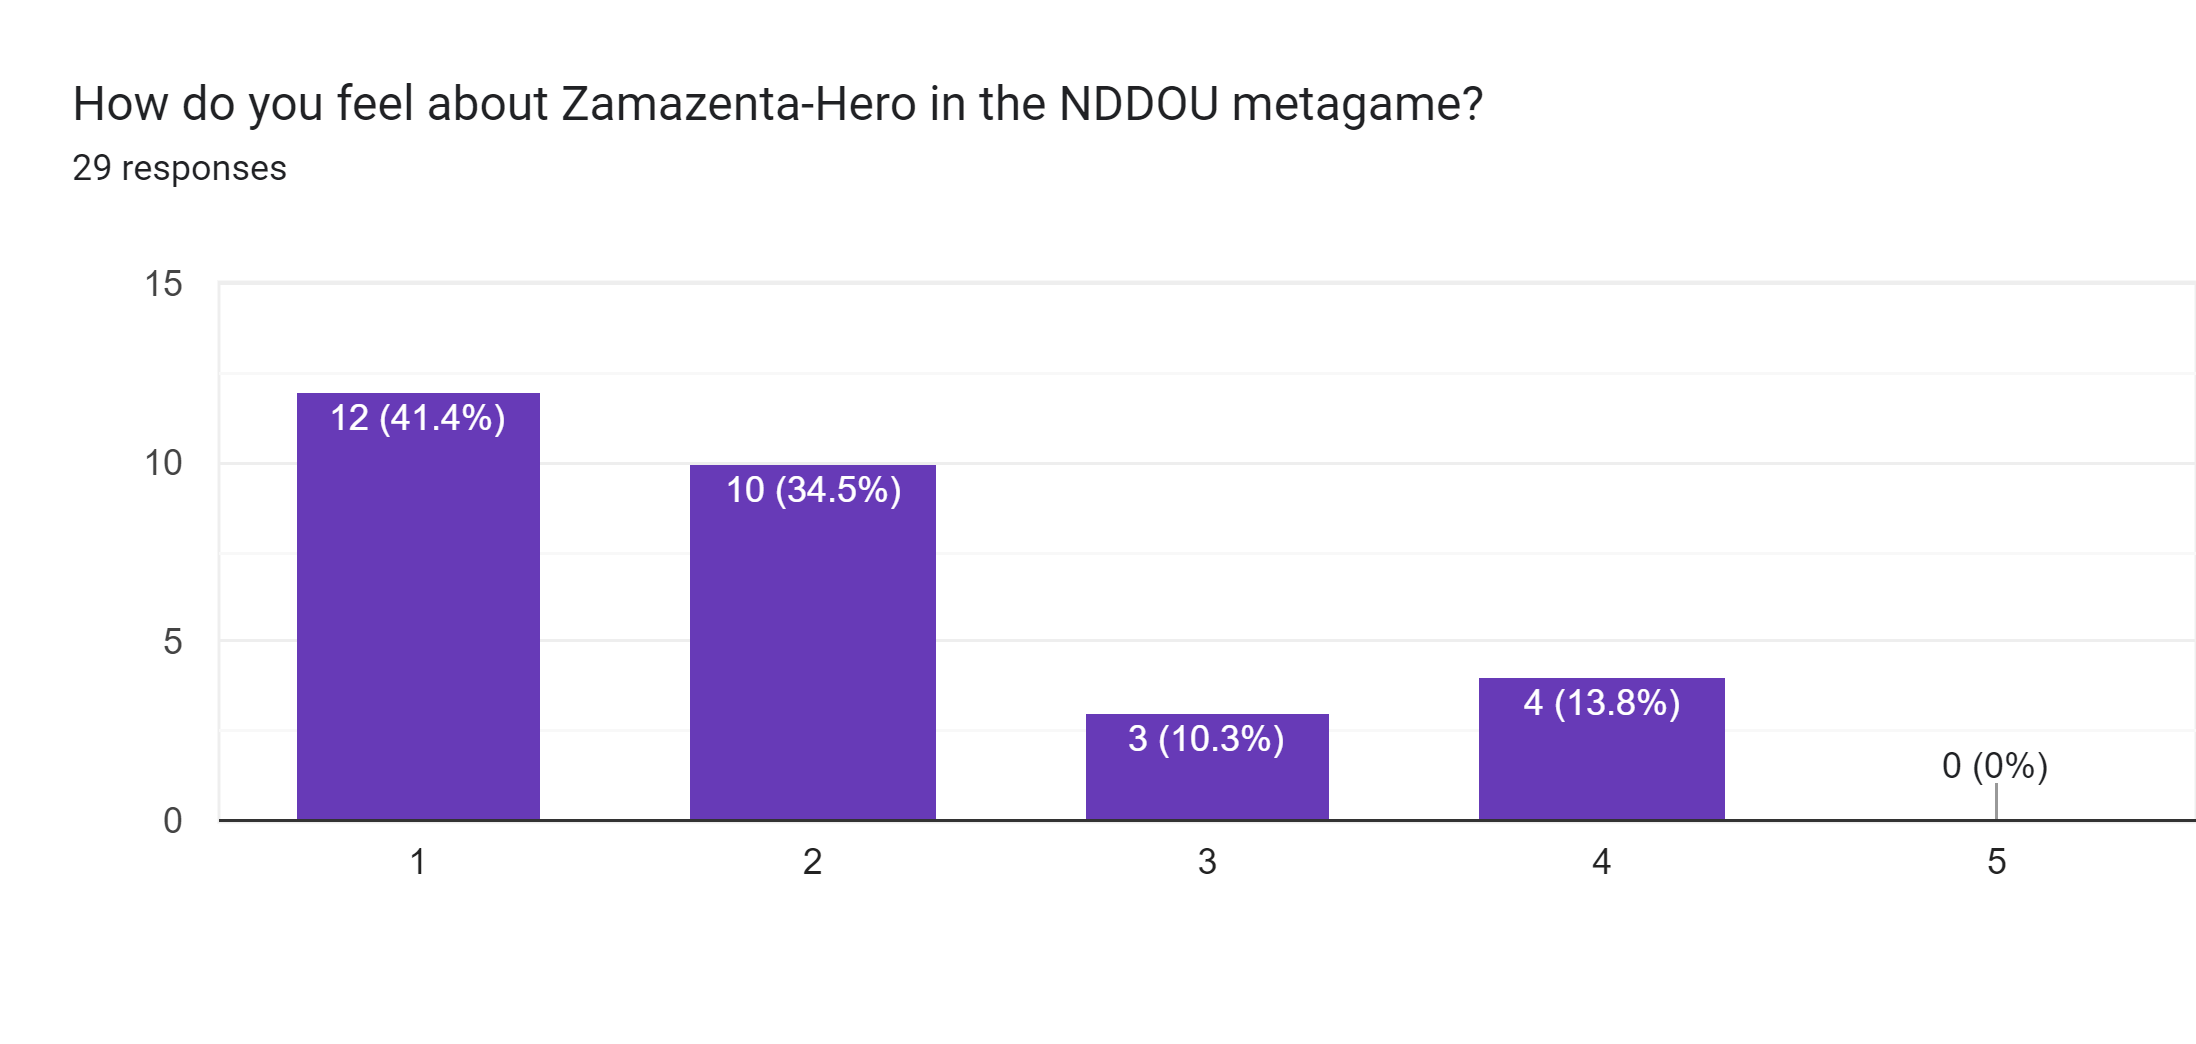 Forms response chart. Question title: How do you feel about Zamazenta-Hero in the NDDOU metagame?. Number of responses: 29 responses.